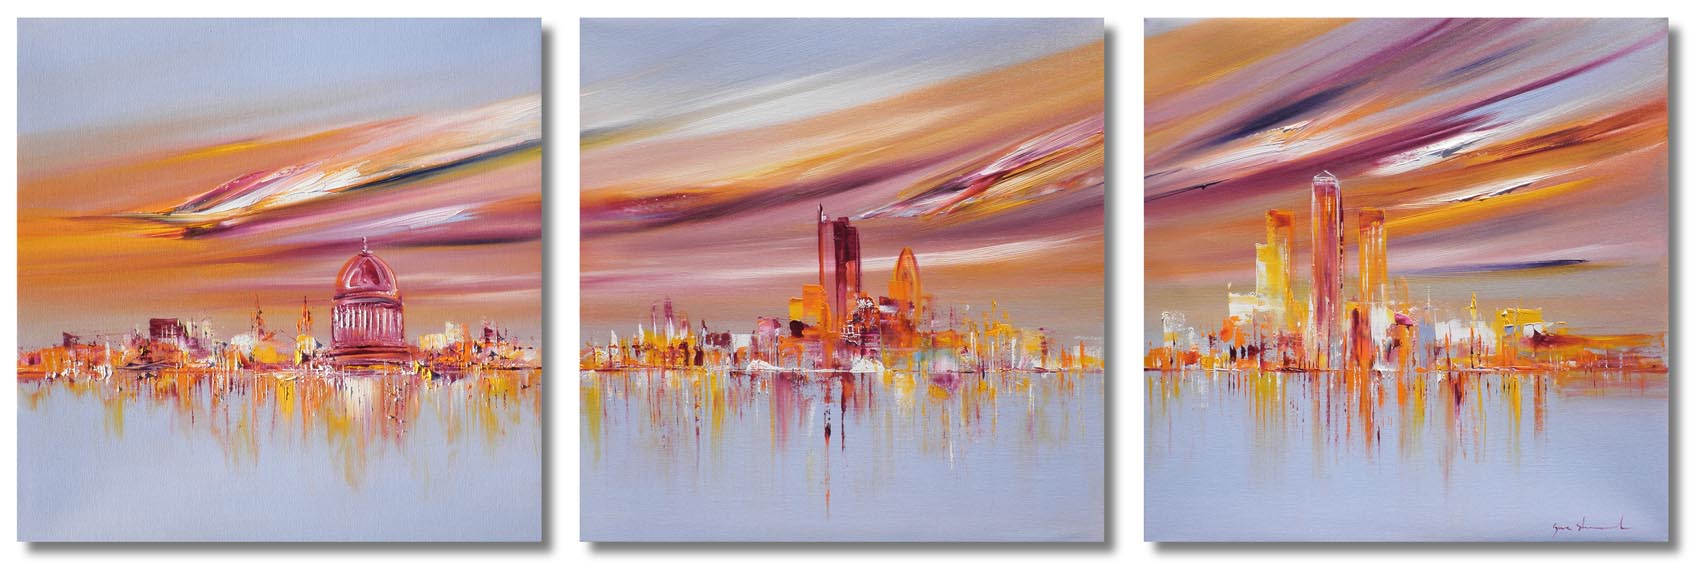 I can Breathe oil on canvas cityscape painting 97514